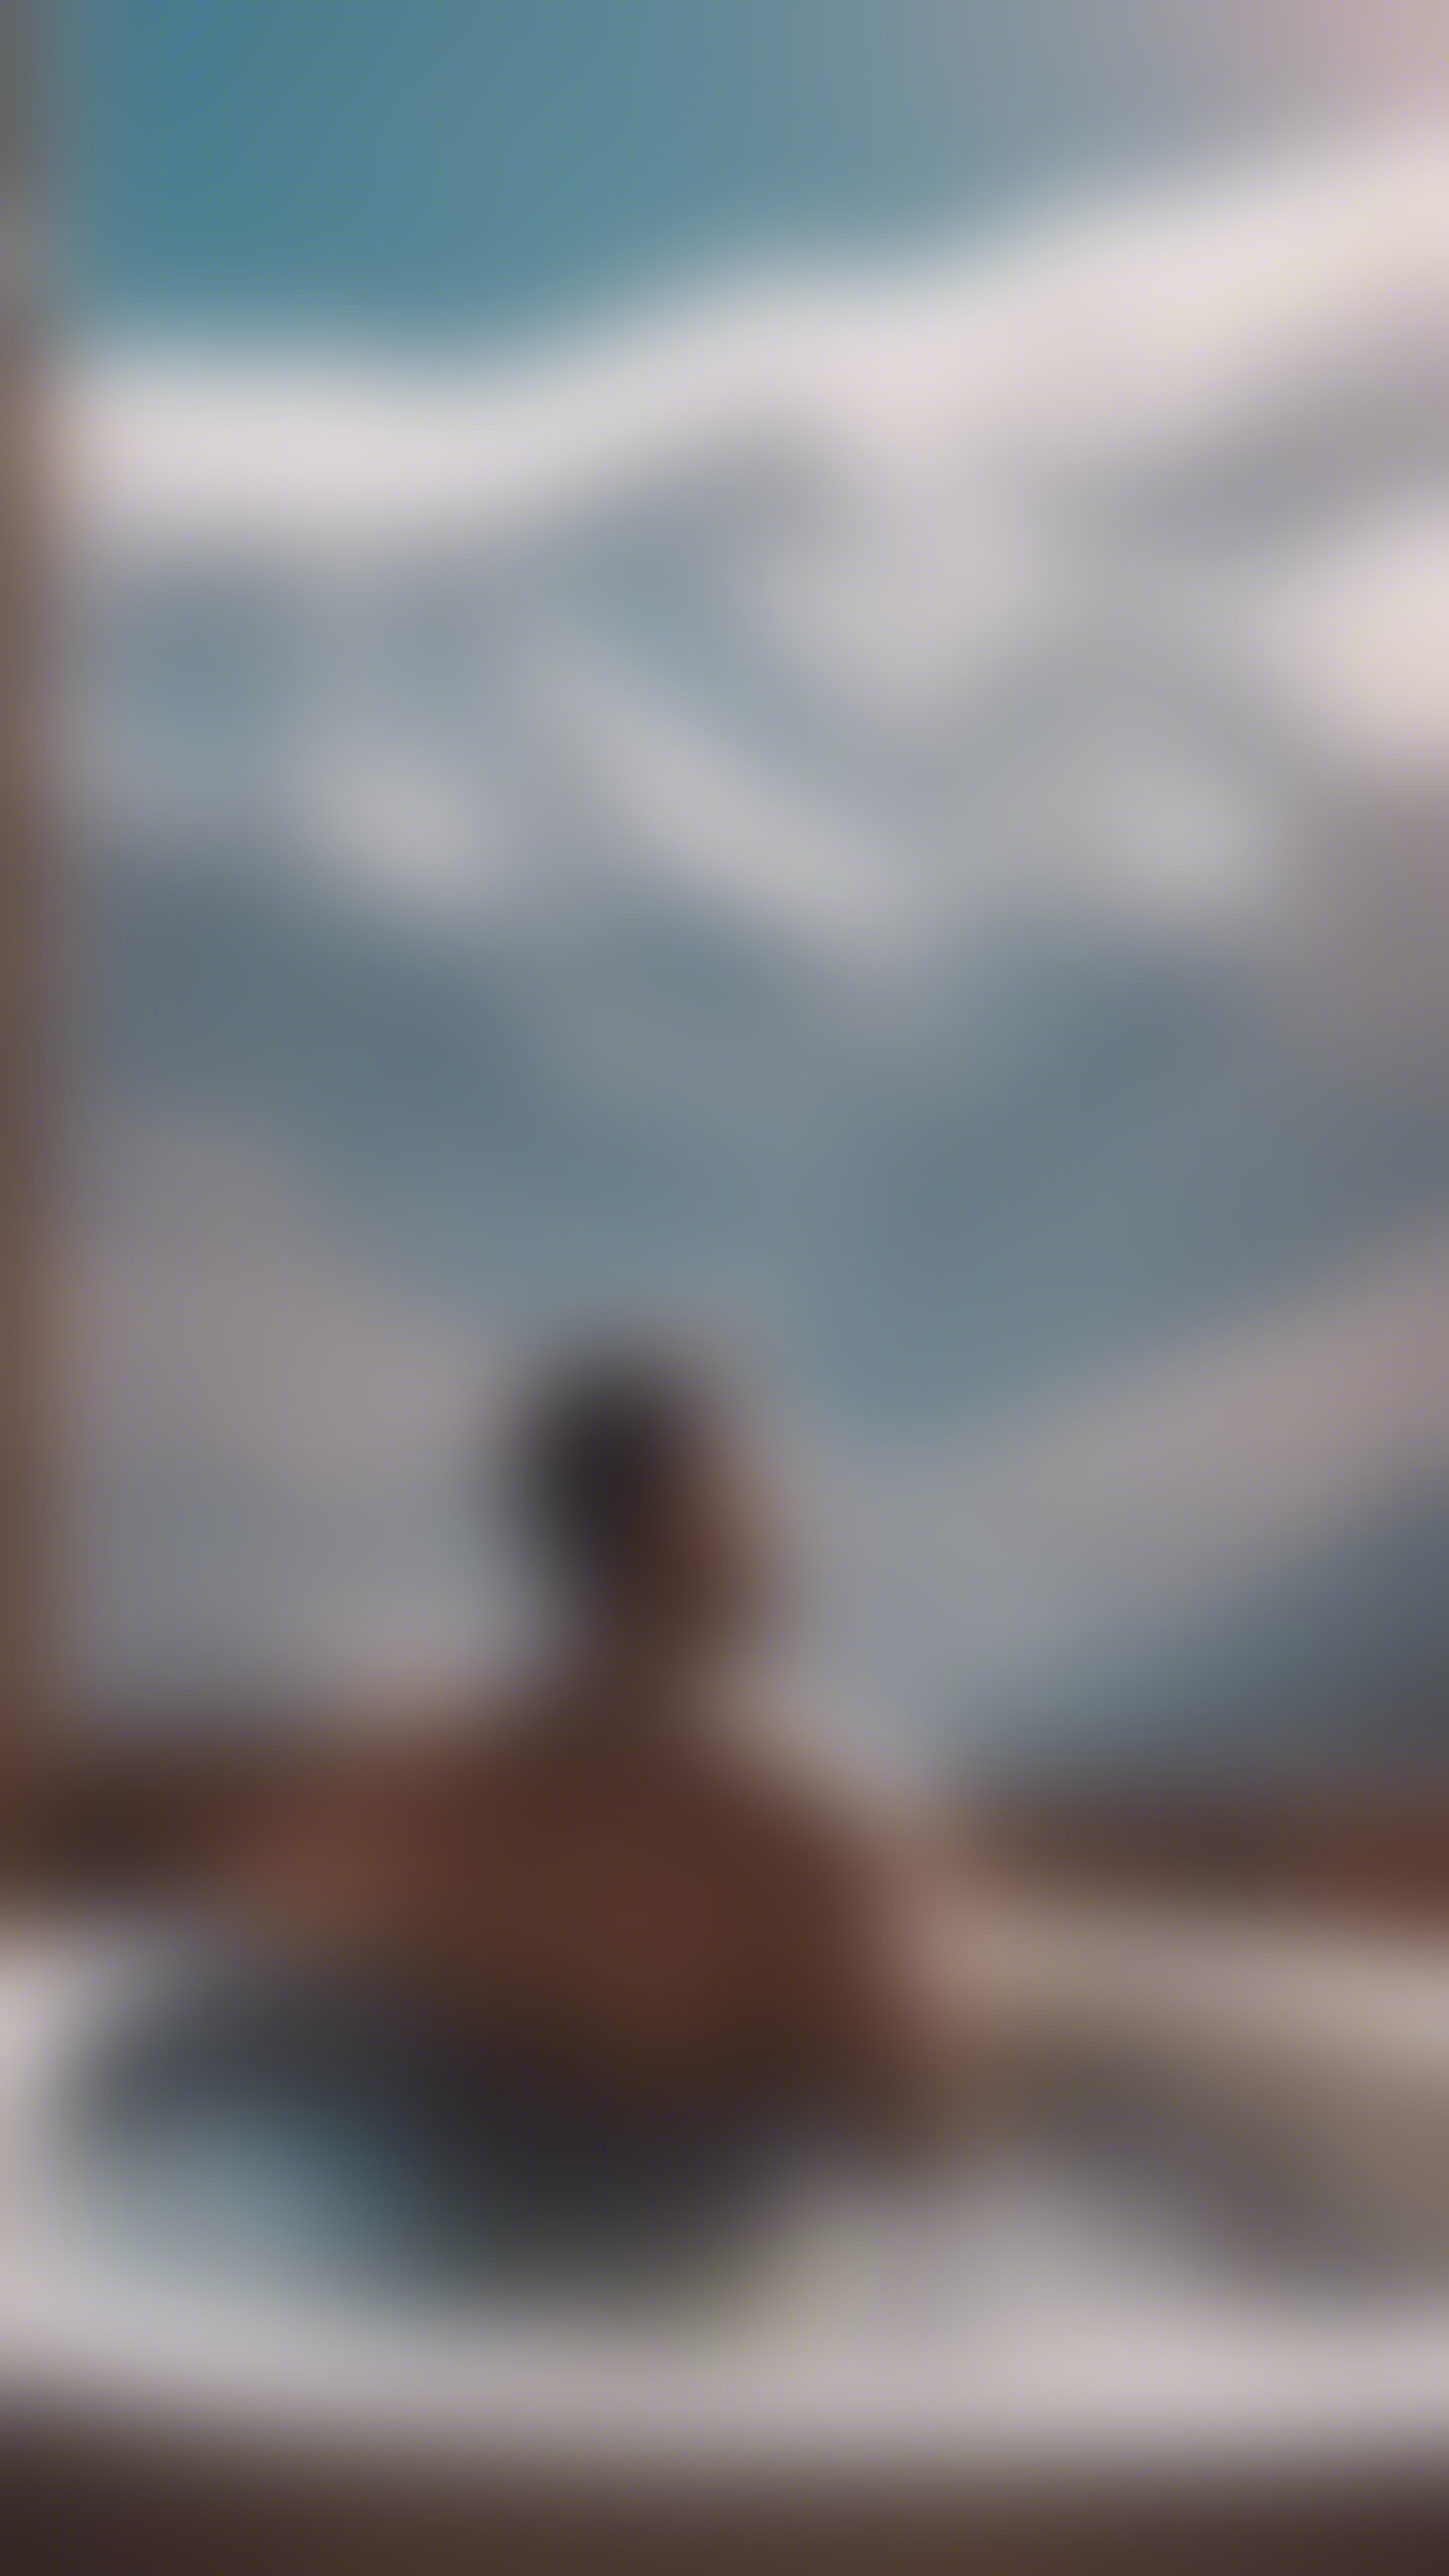 A relaxed man soaking in a hot tub looking over snow-capped mountains. Wallpaper[0318ae8339ac4291bfc9]